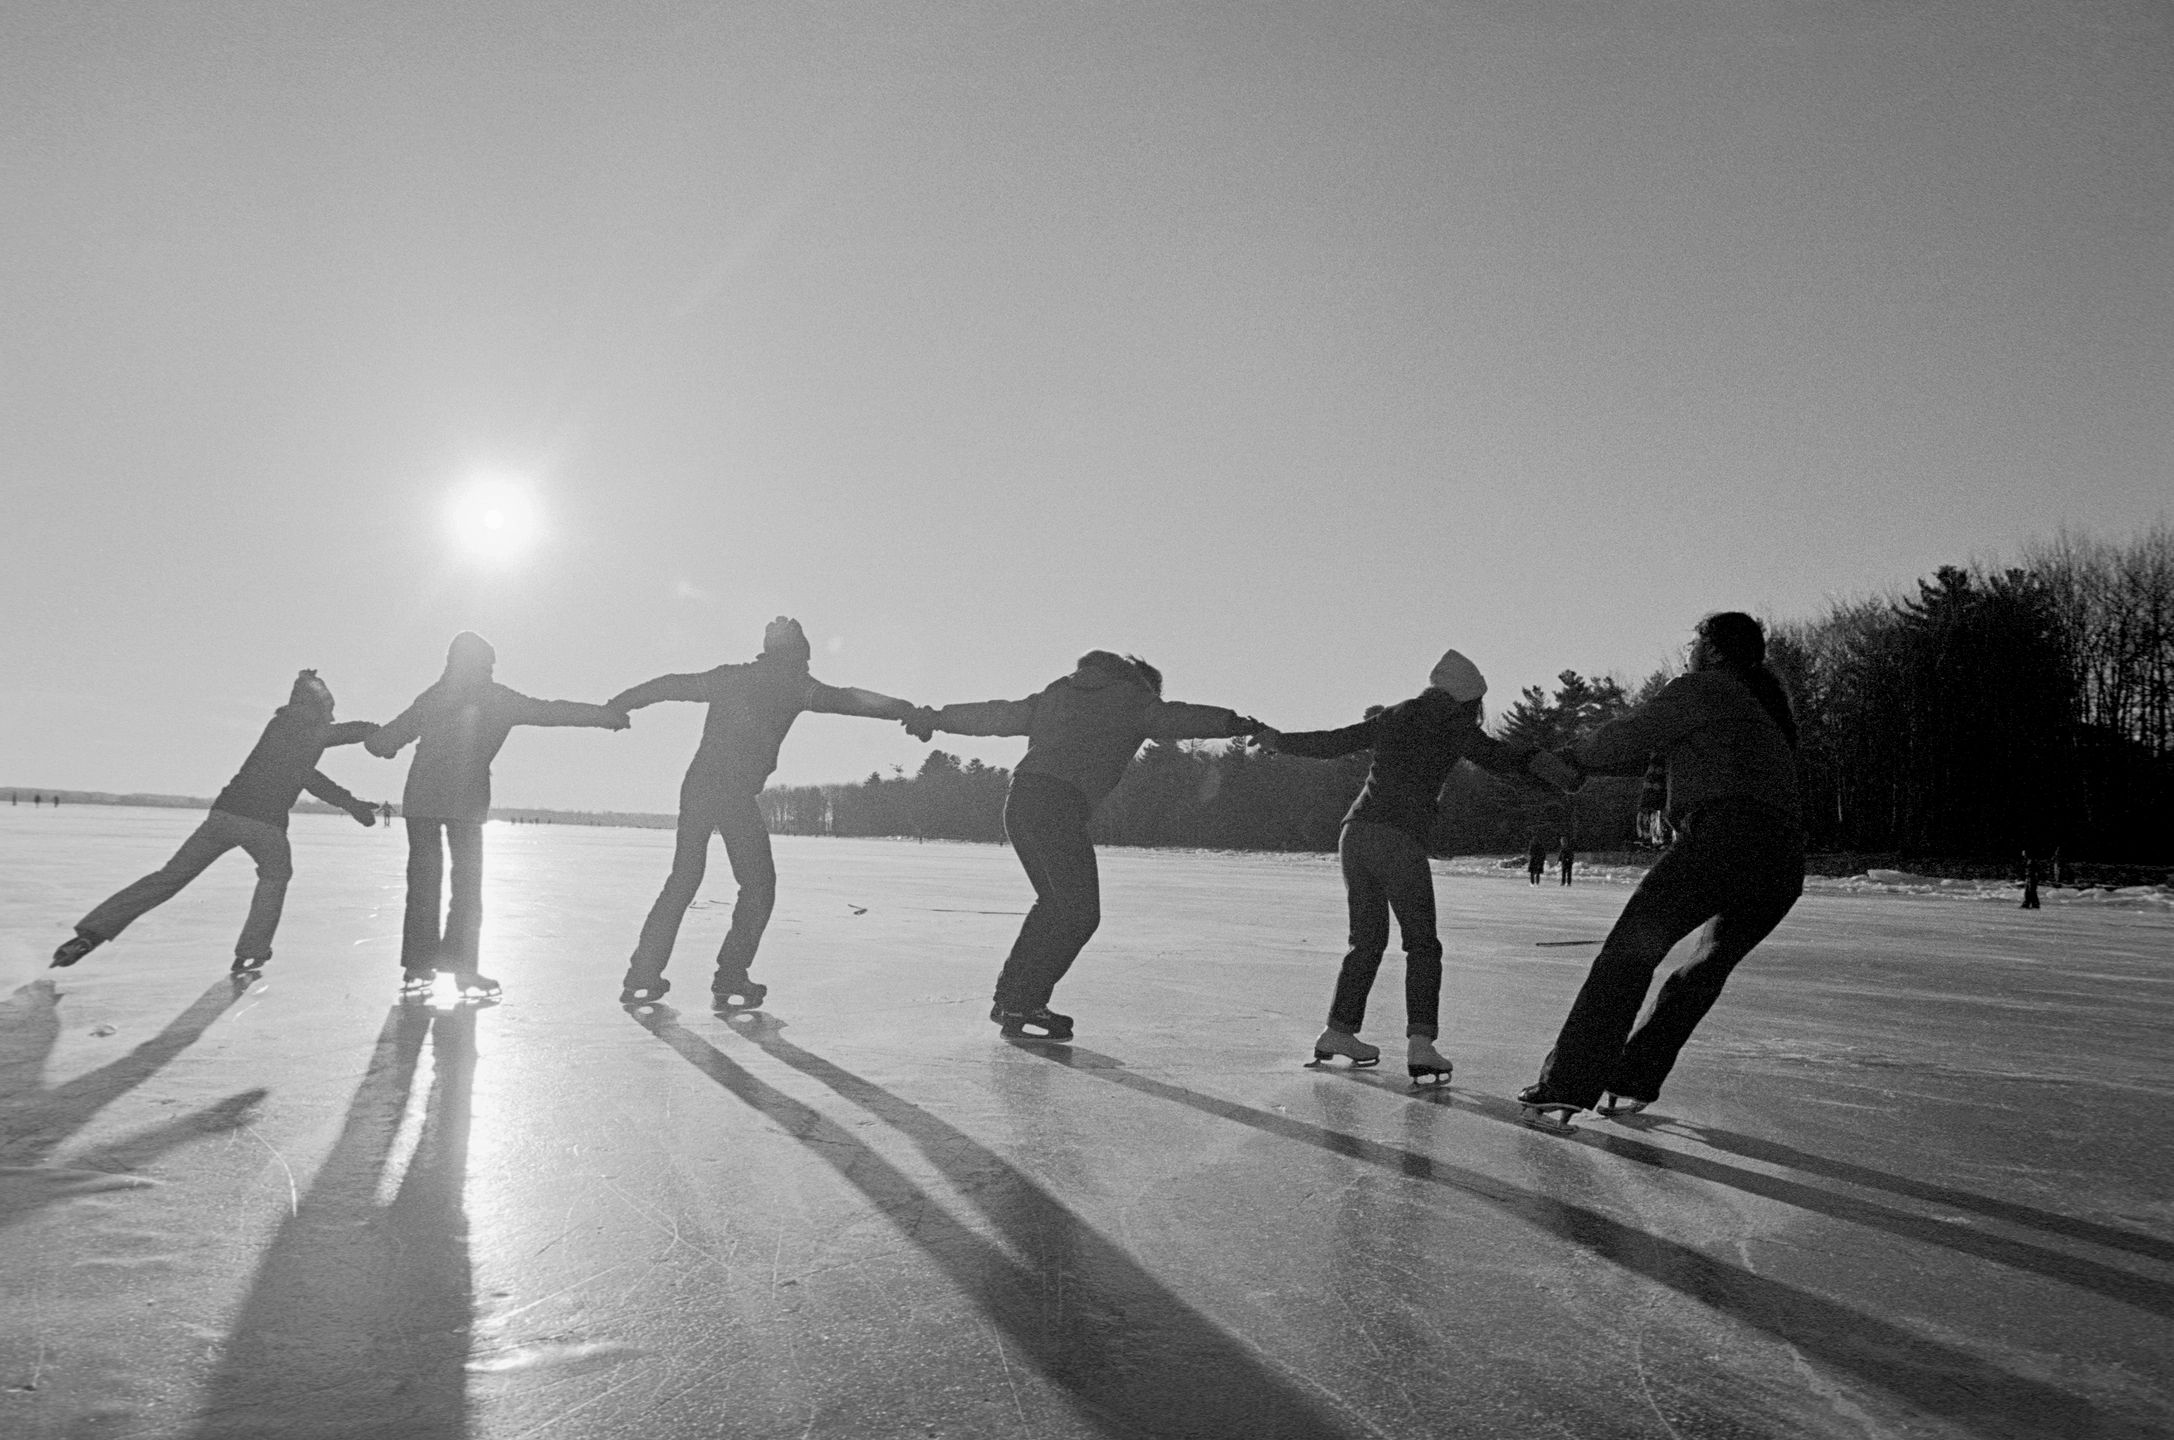 Skaters at an ice rink